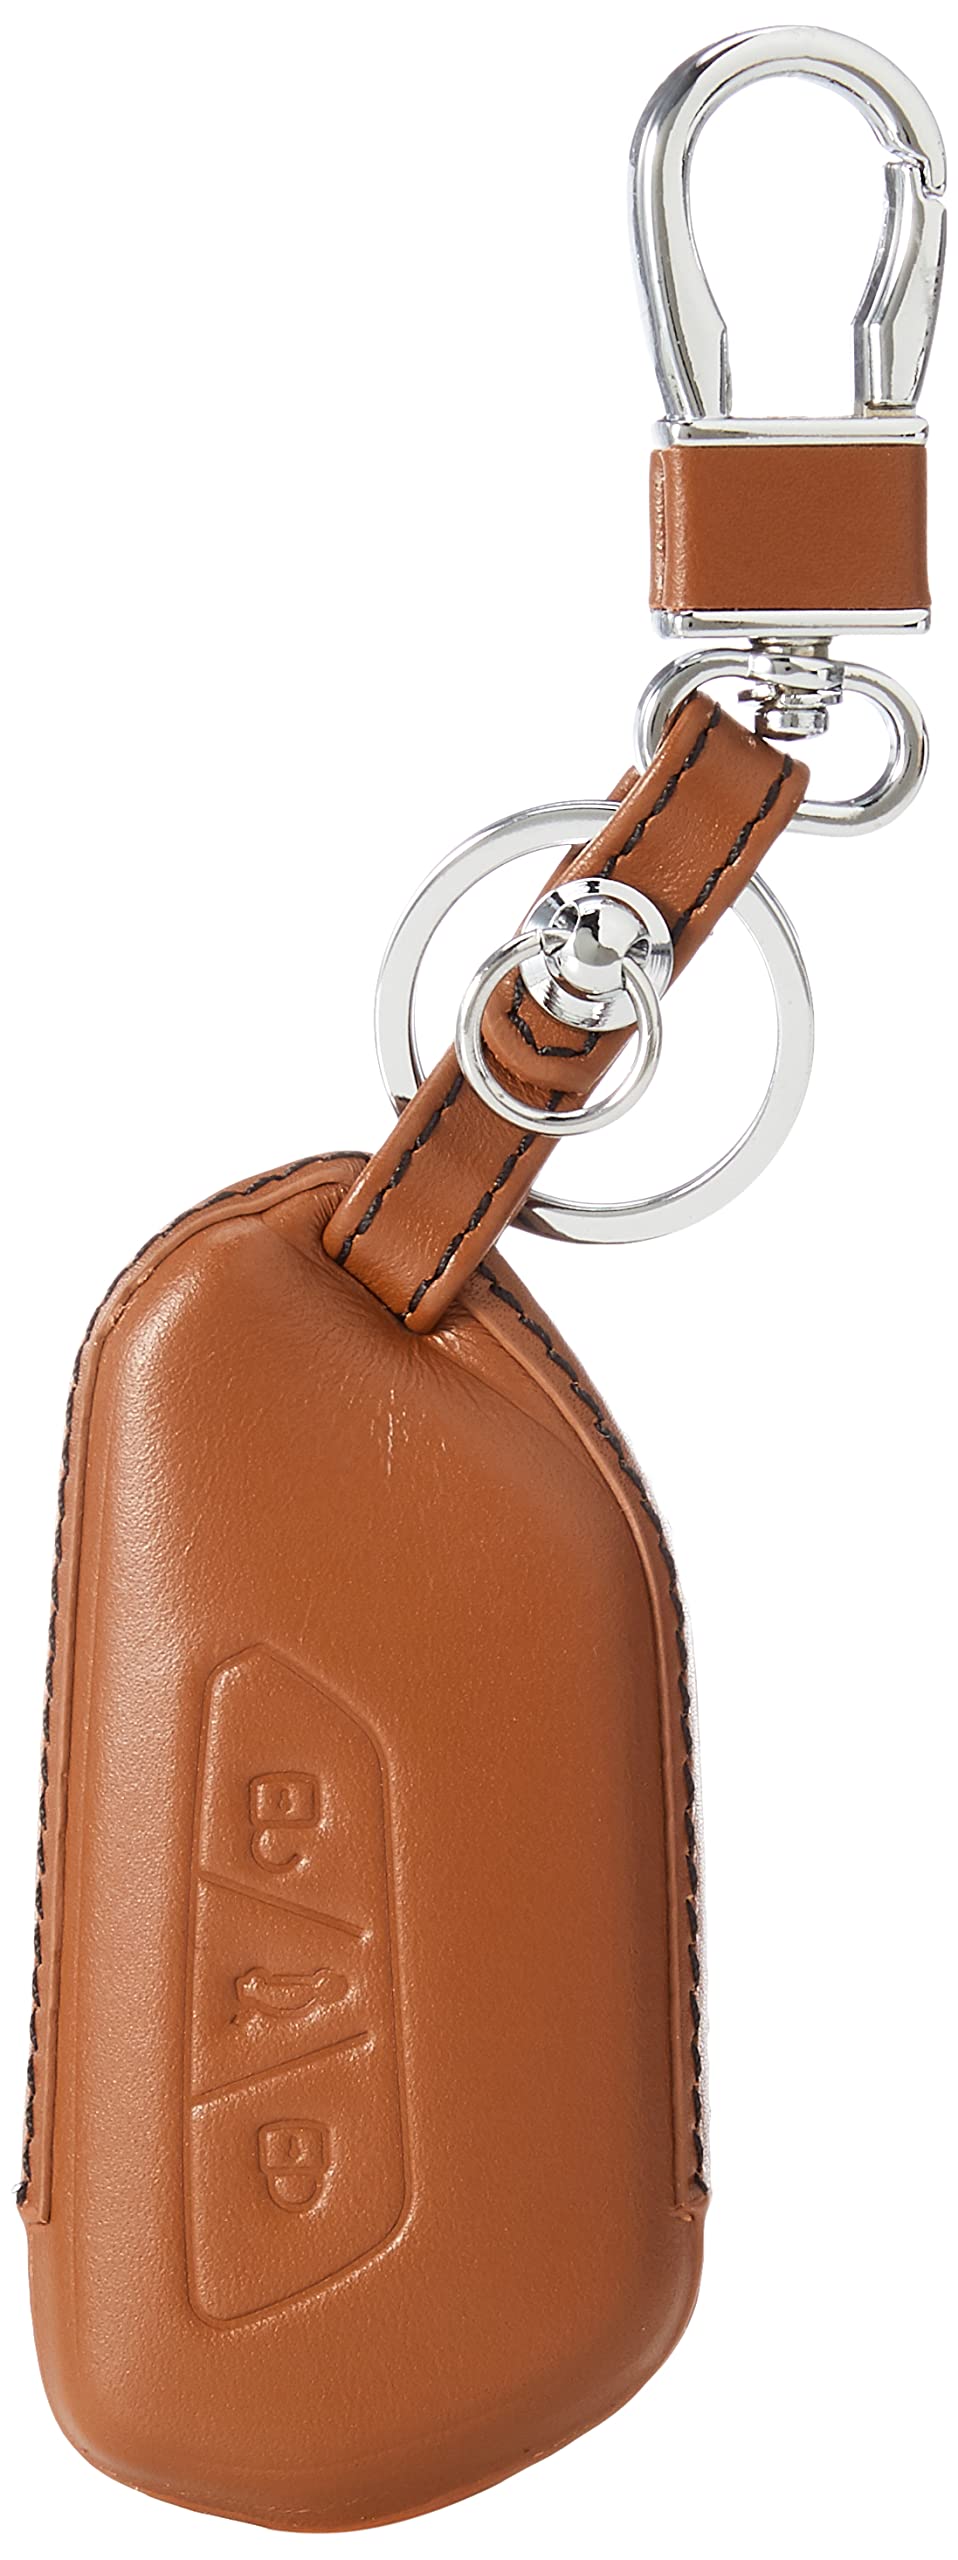 core OBJ select Brown Leather Key Cover レザーキーカバーブラウン色 Golf8 LE-GO8-002BB